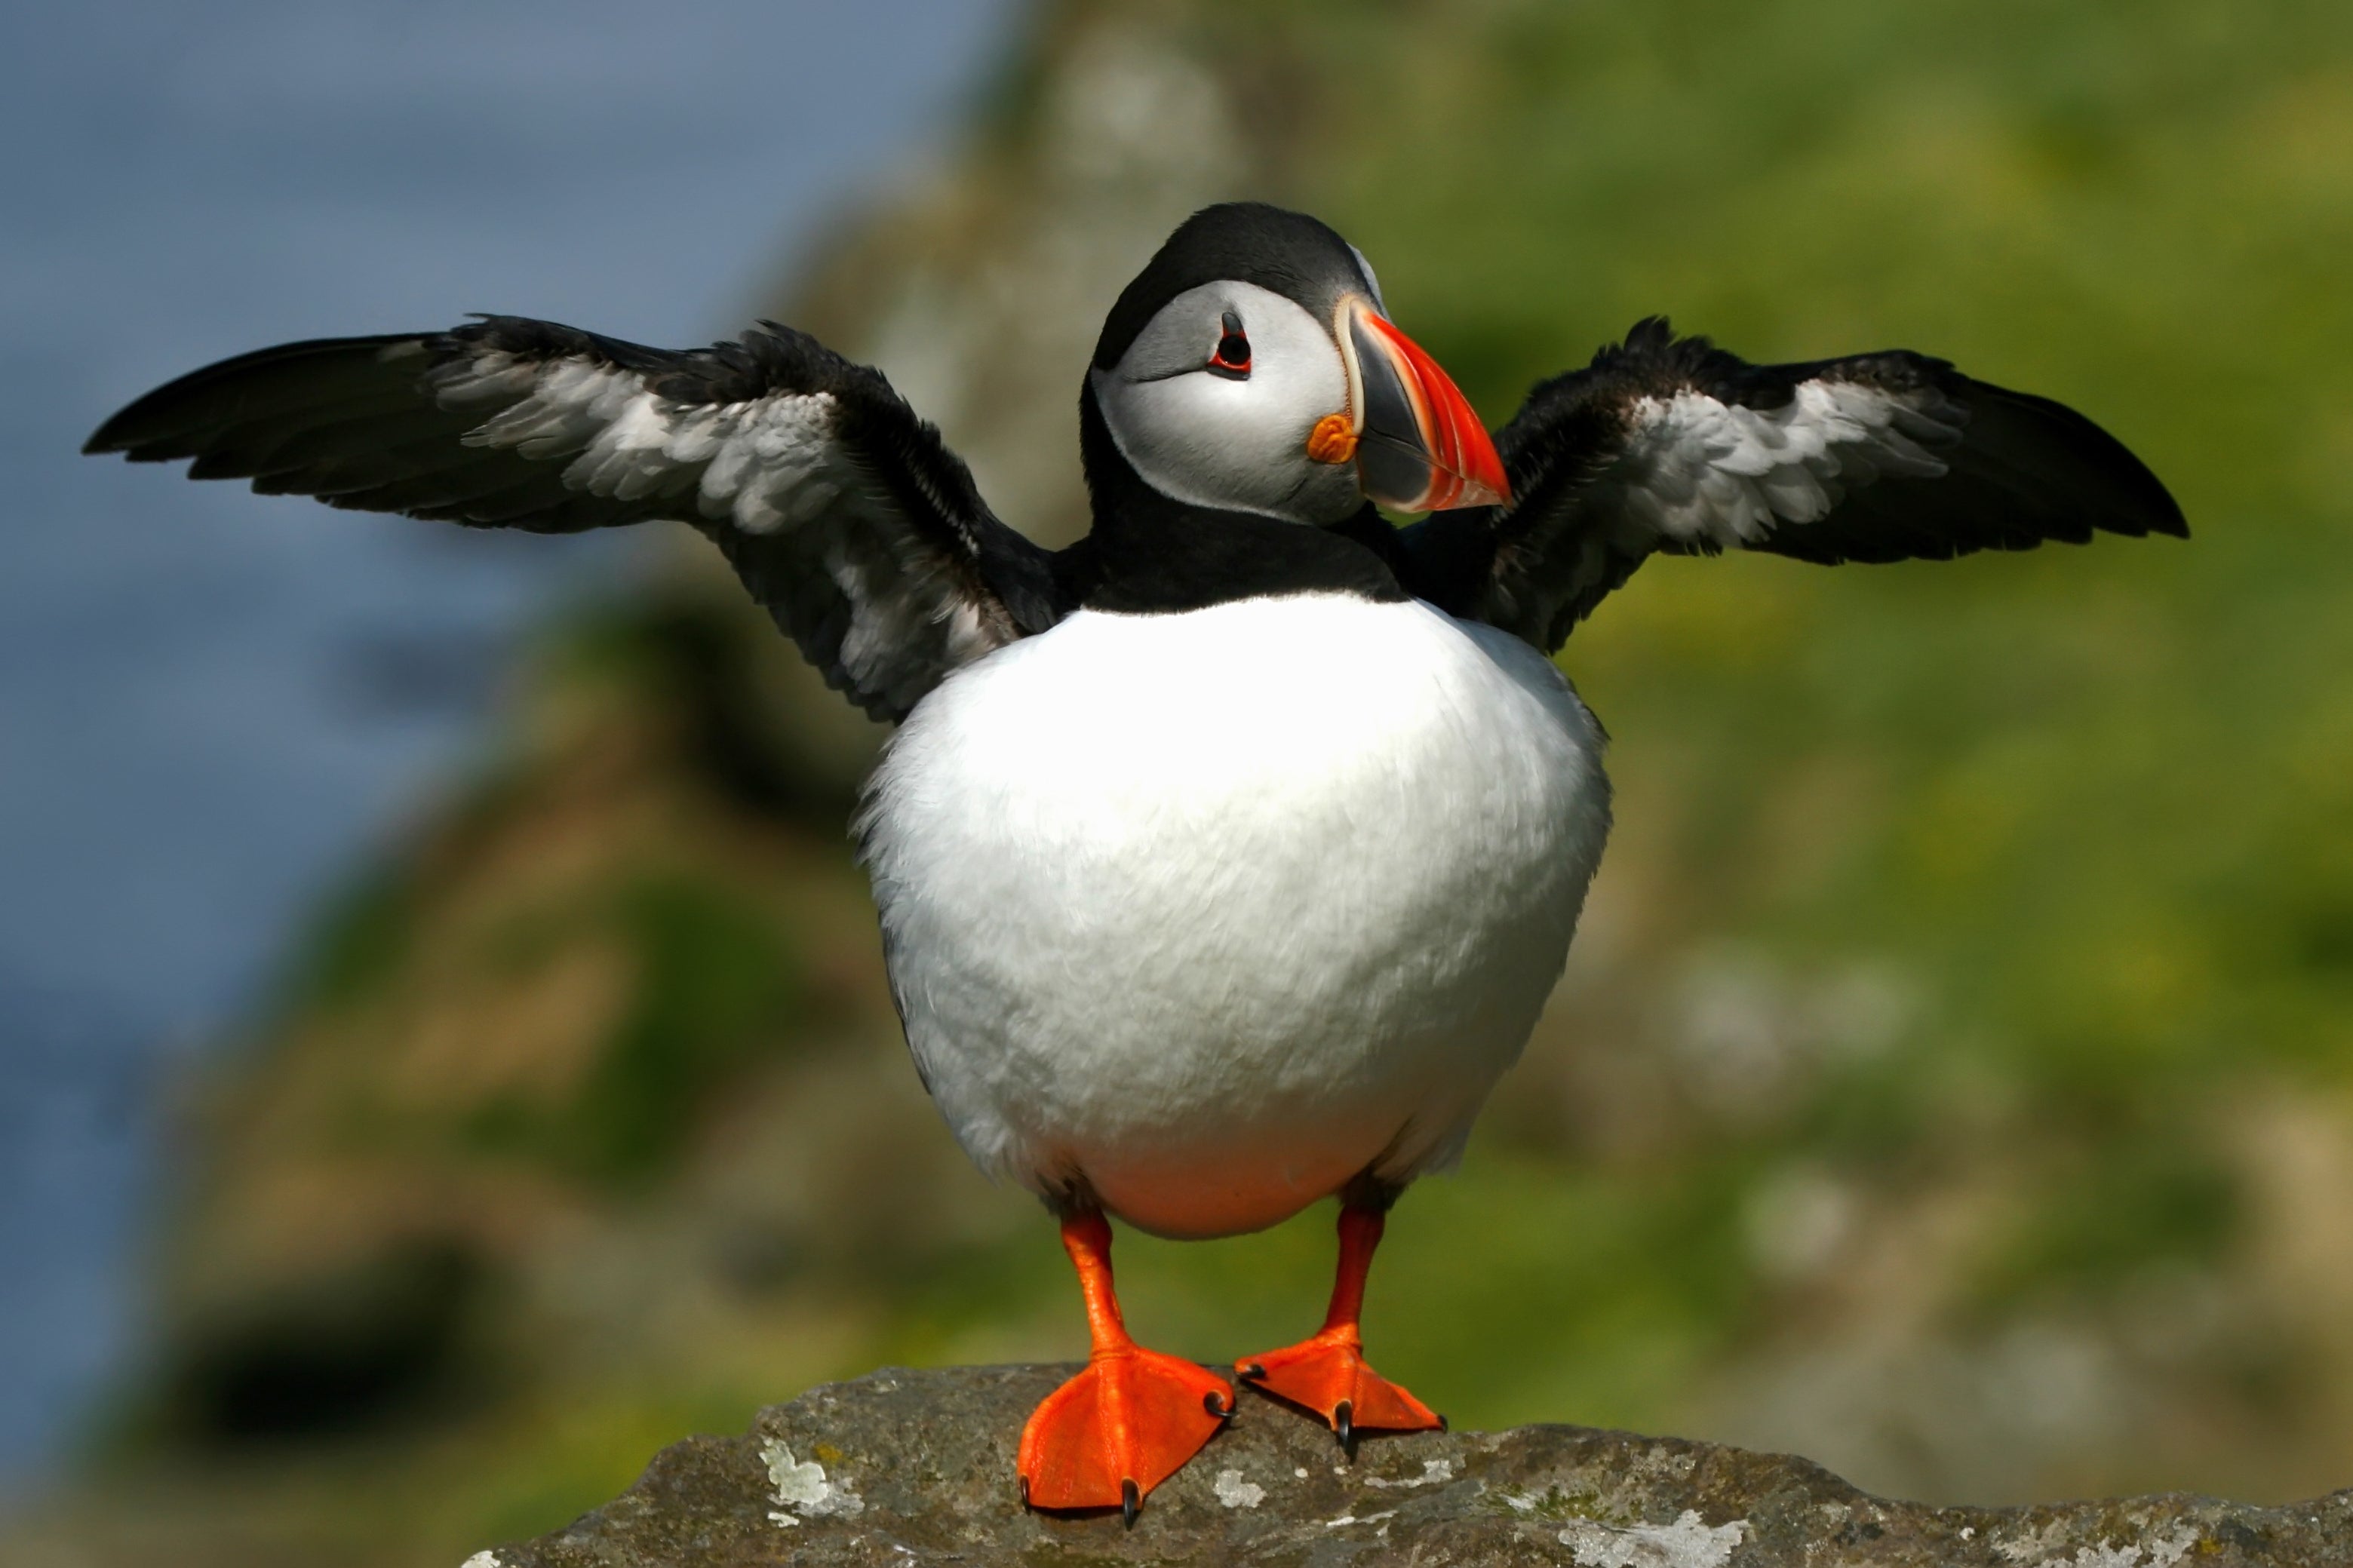 Puffin breeding grounds across western Europe could be threatened by climate change